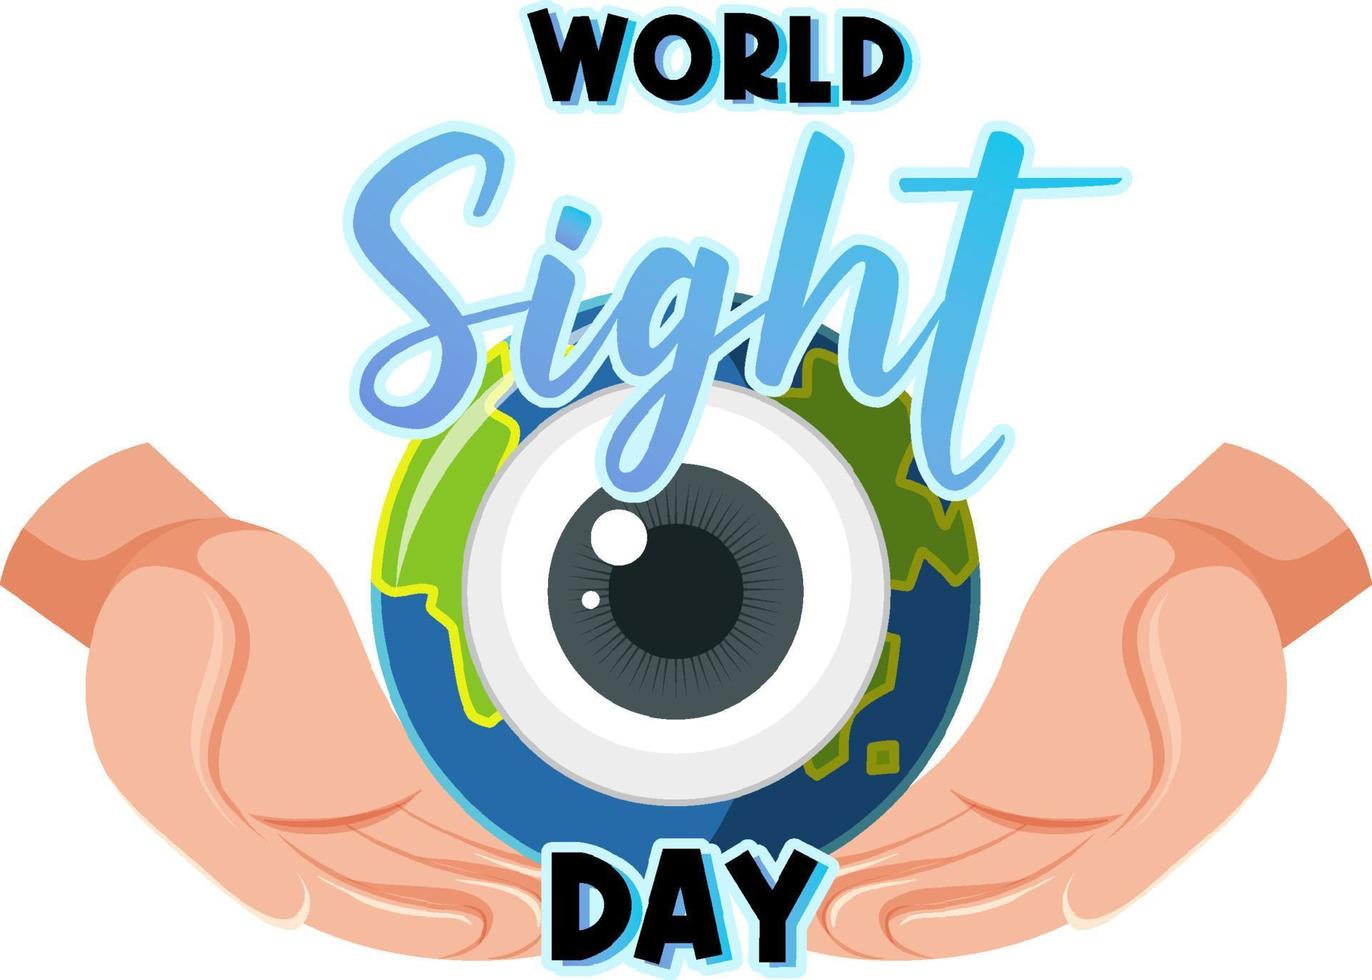 World sight day concept background vector